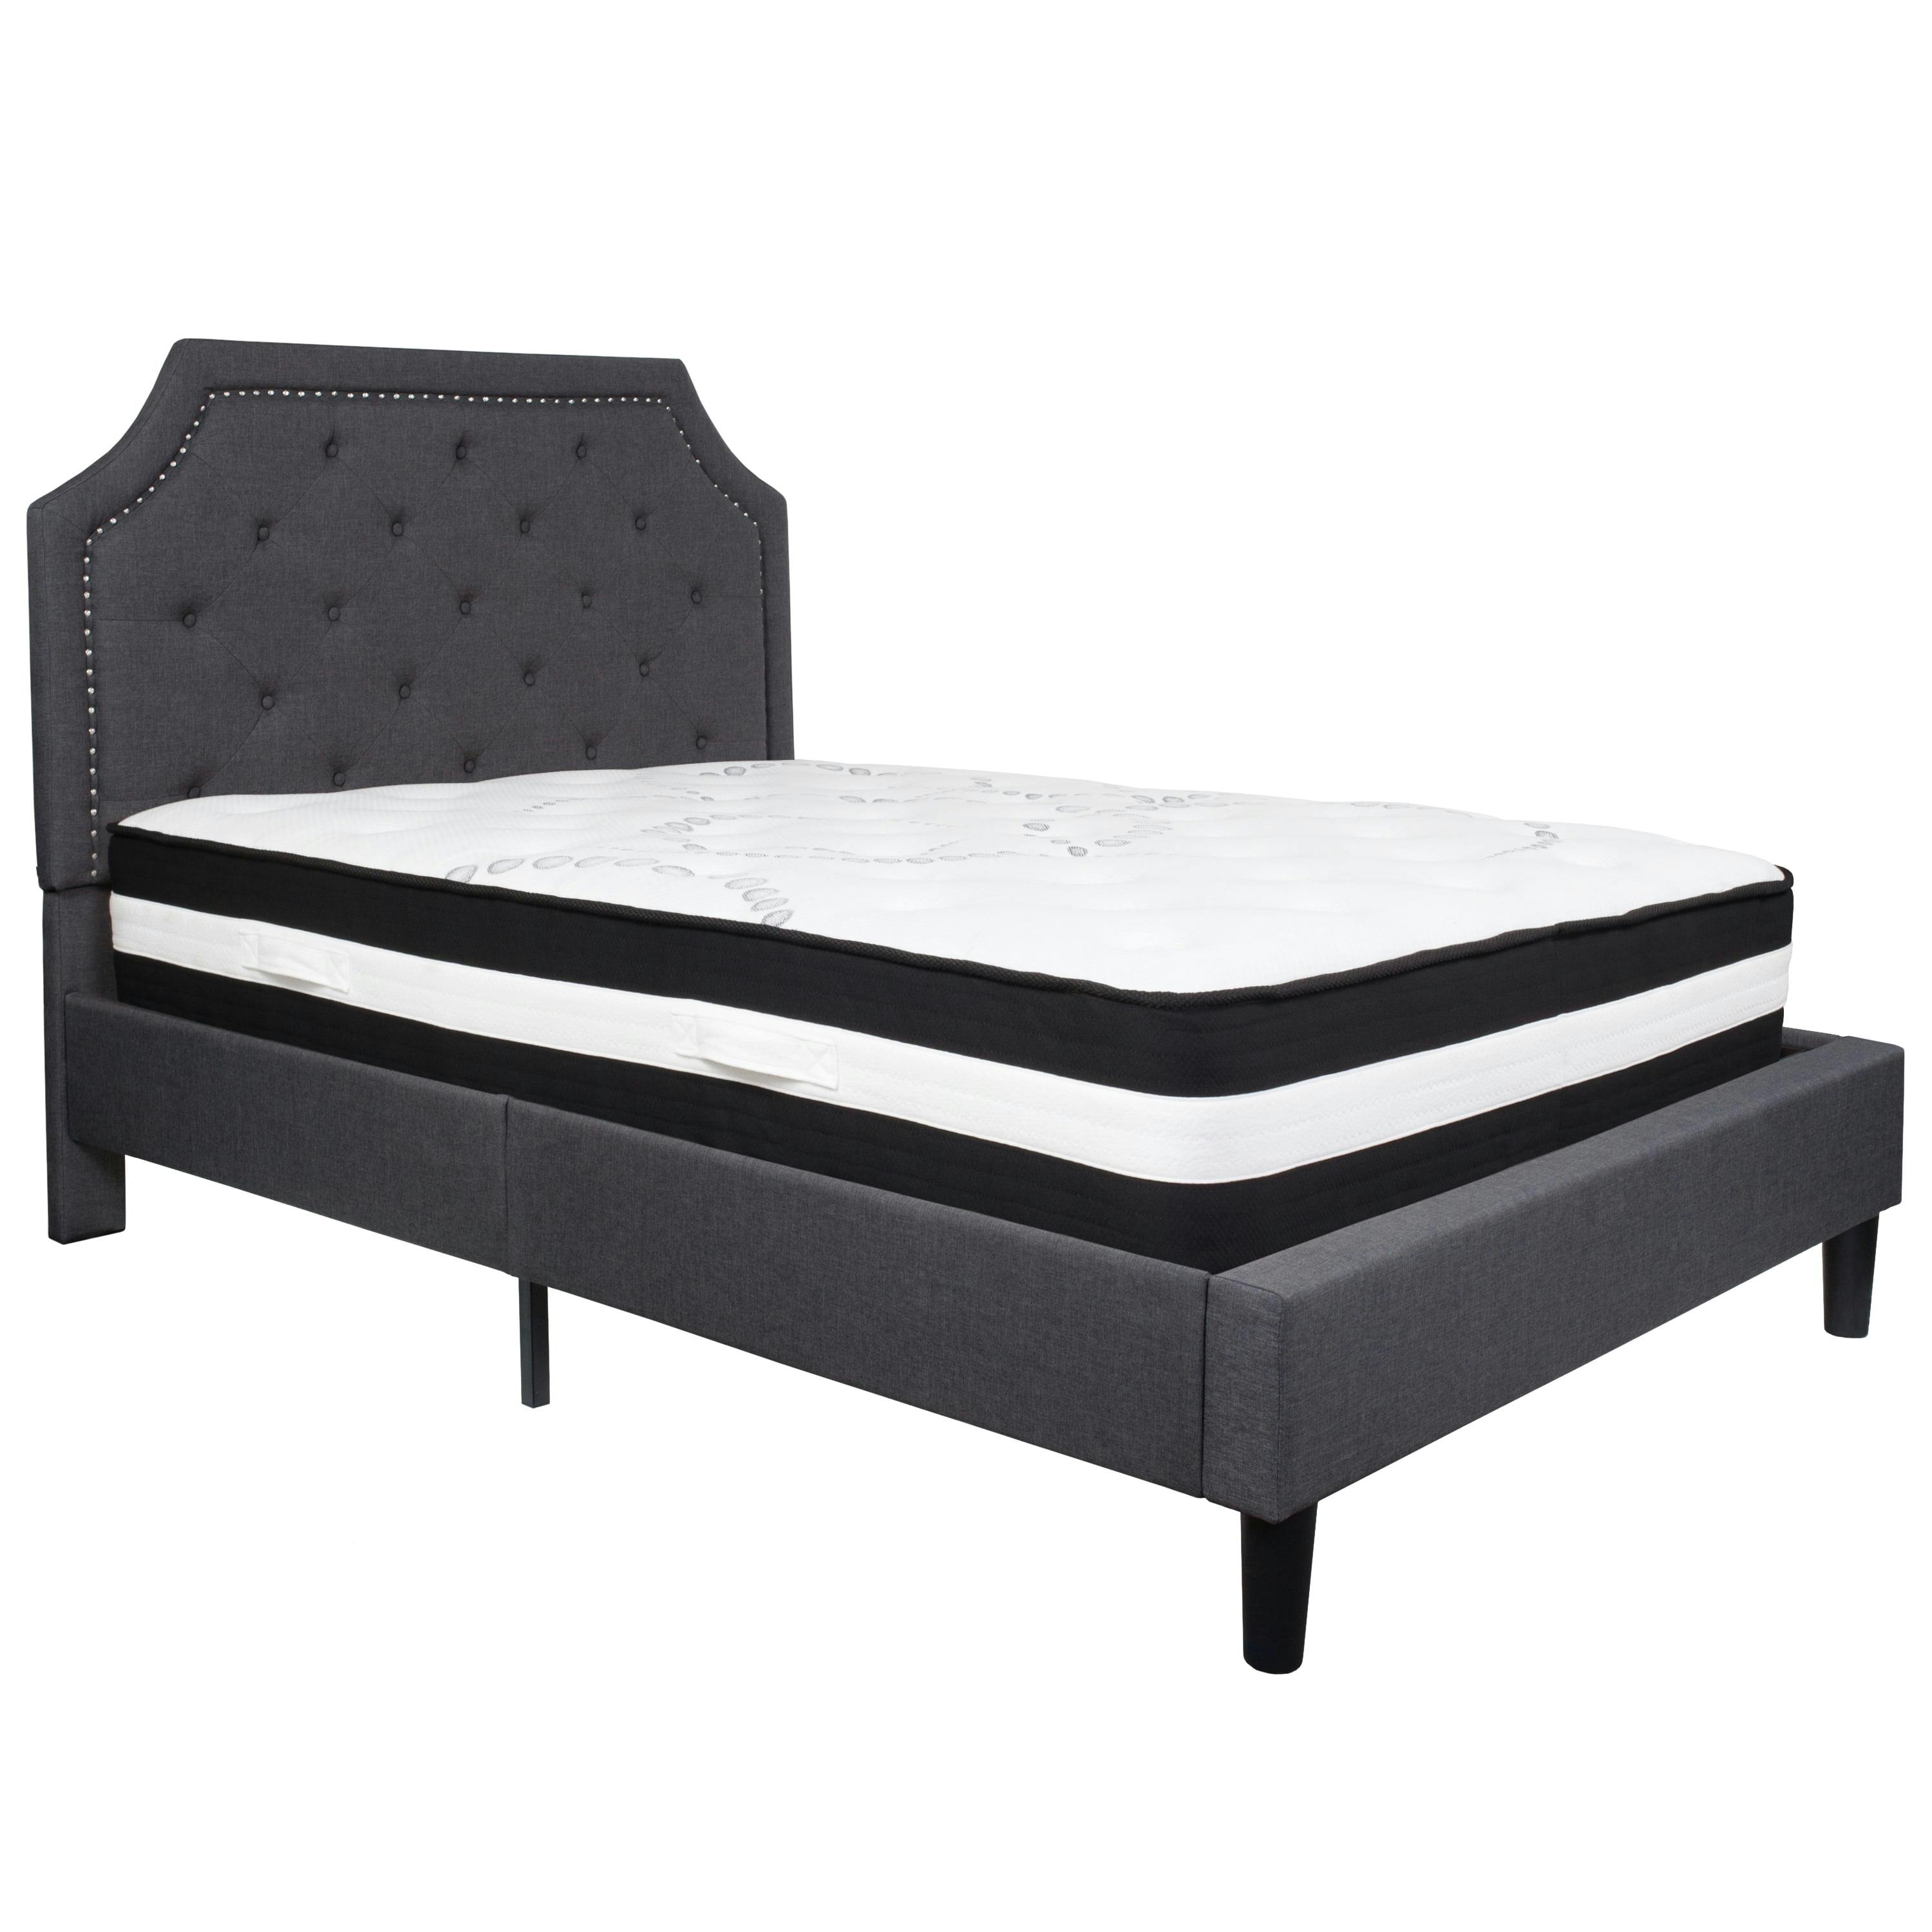 Transitional Full-Size Upholstered Metal Platform Bed with Nailhead Trim in Dark Gray